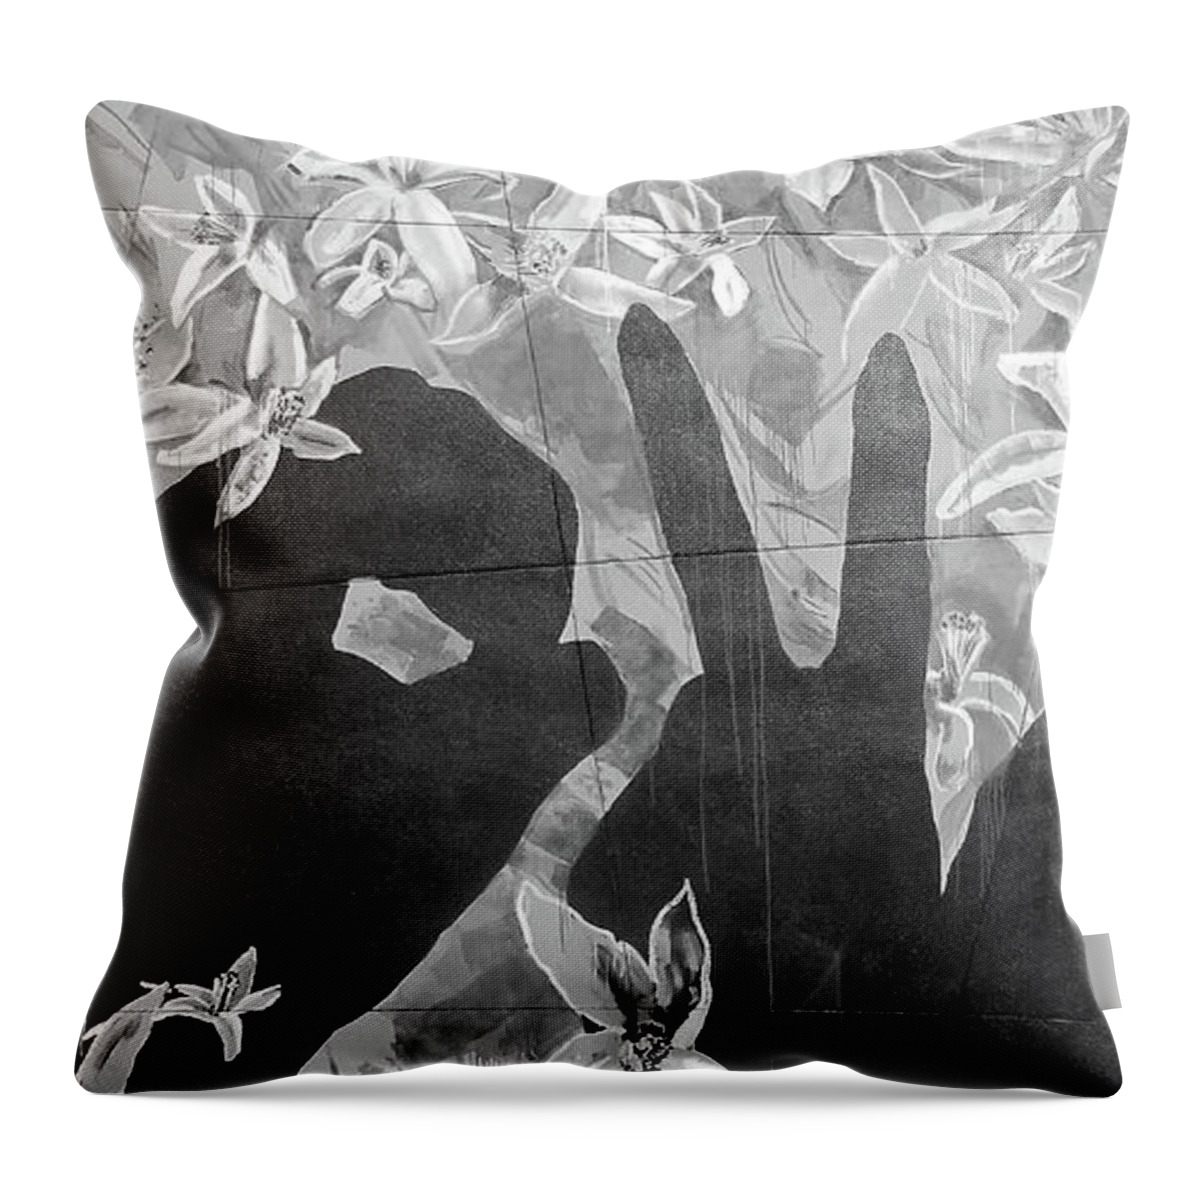 Graffiti Throw Pillow featuring the photograph Never Forget by Juergen Weiss